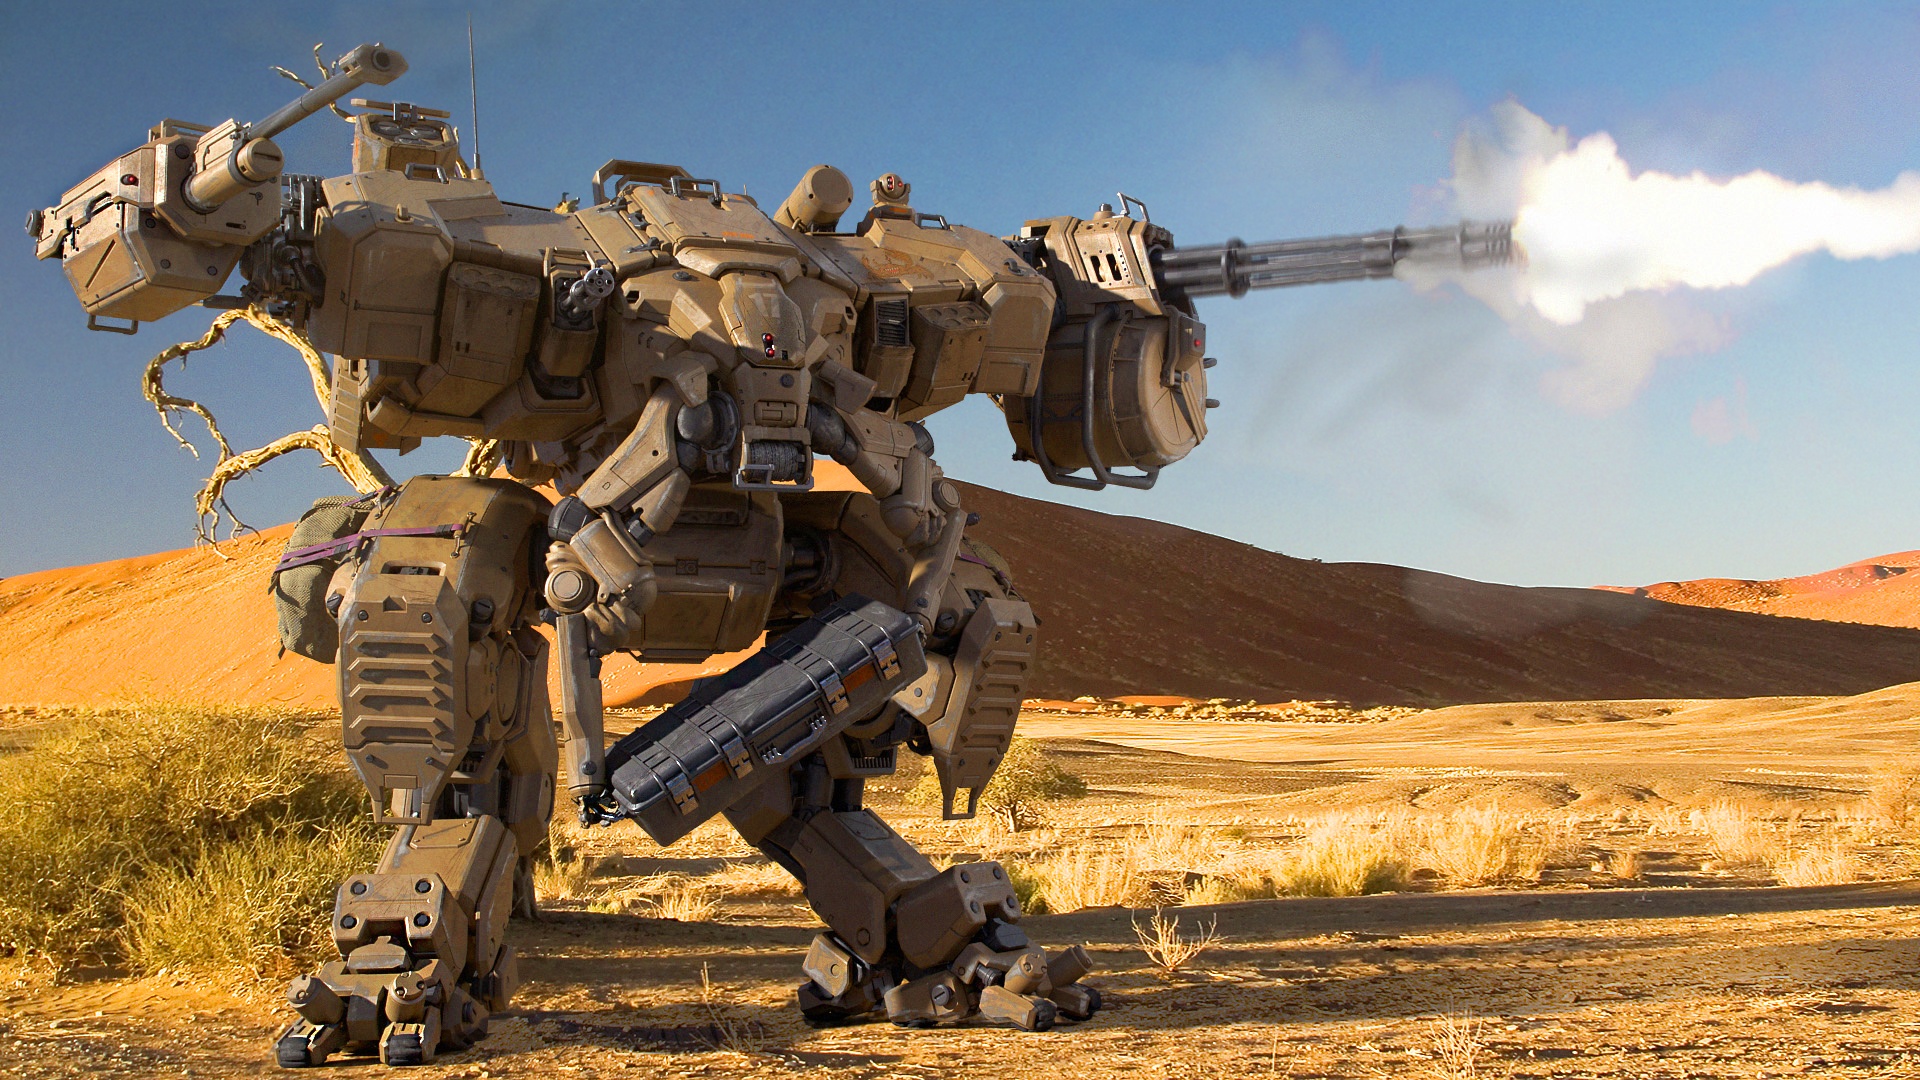 Mechwarrior Hd Wallpaper - Military Robots Of The Future , HD Wallpaper & Backgrounds